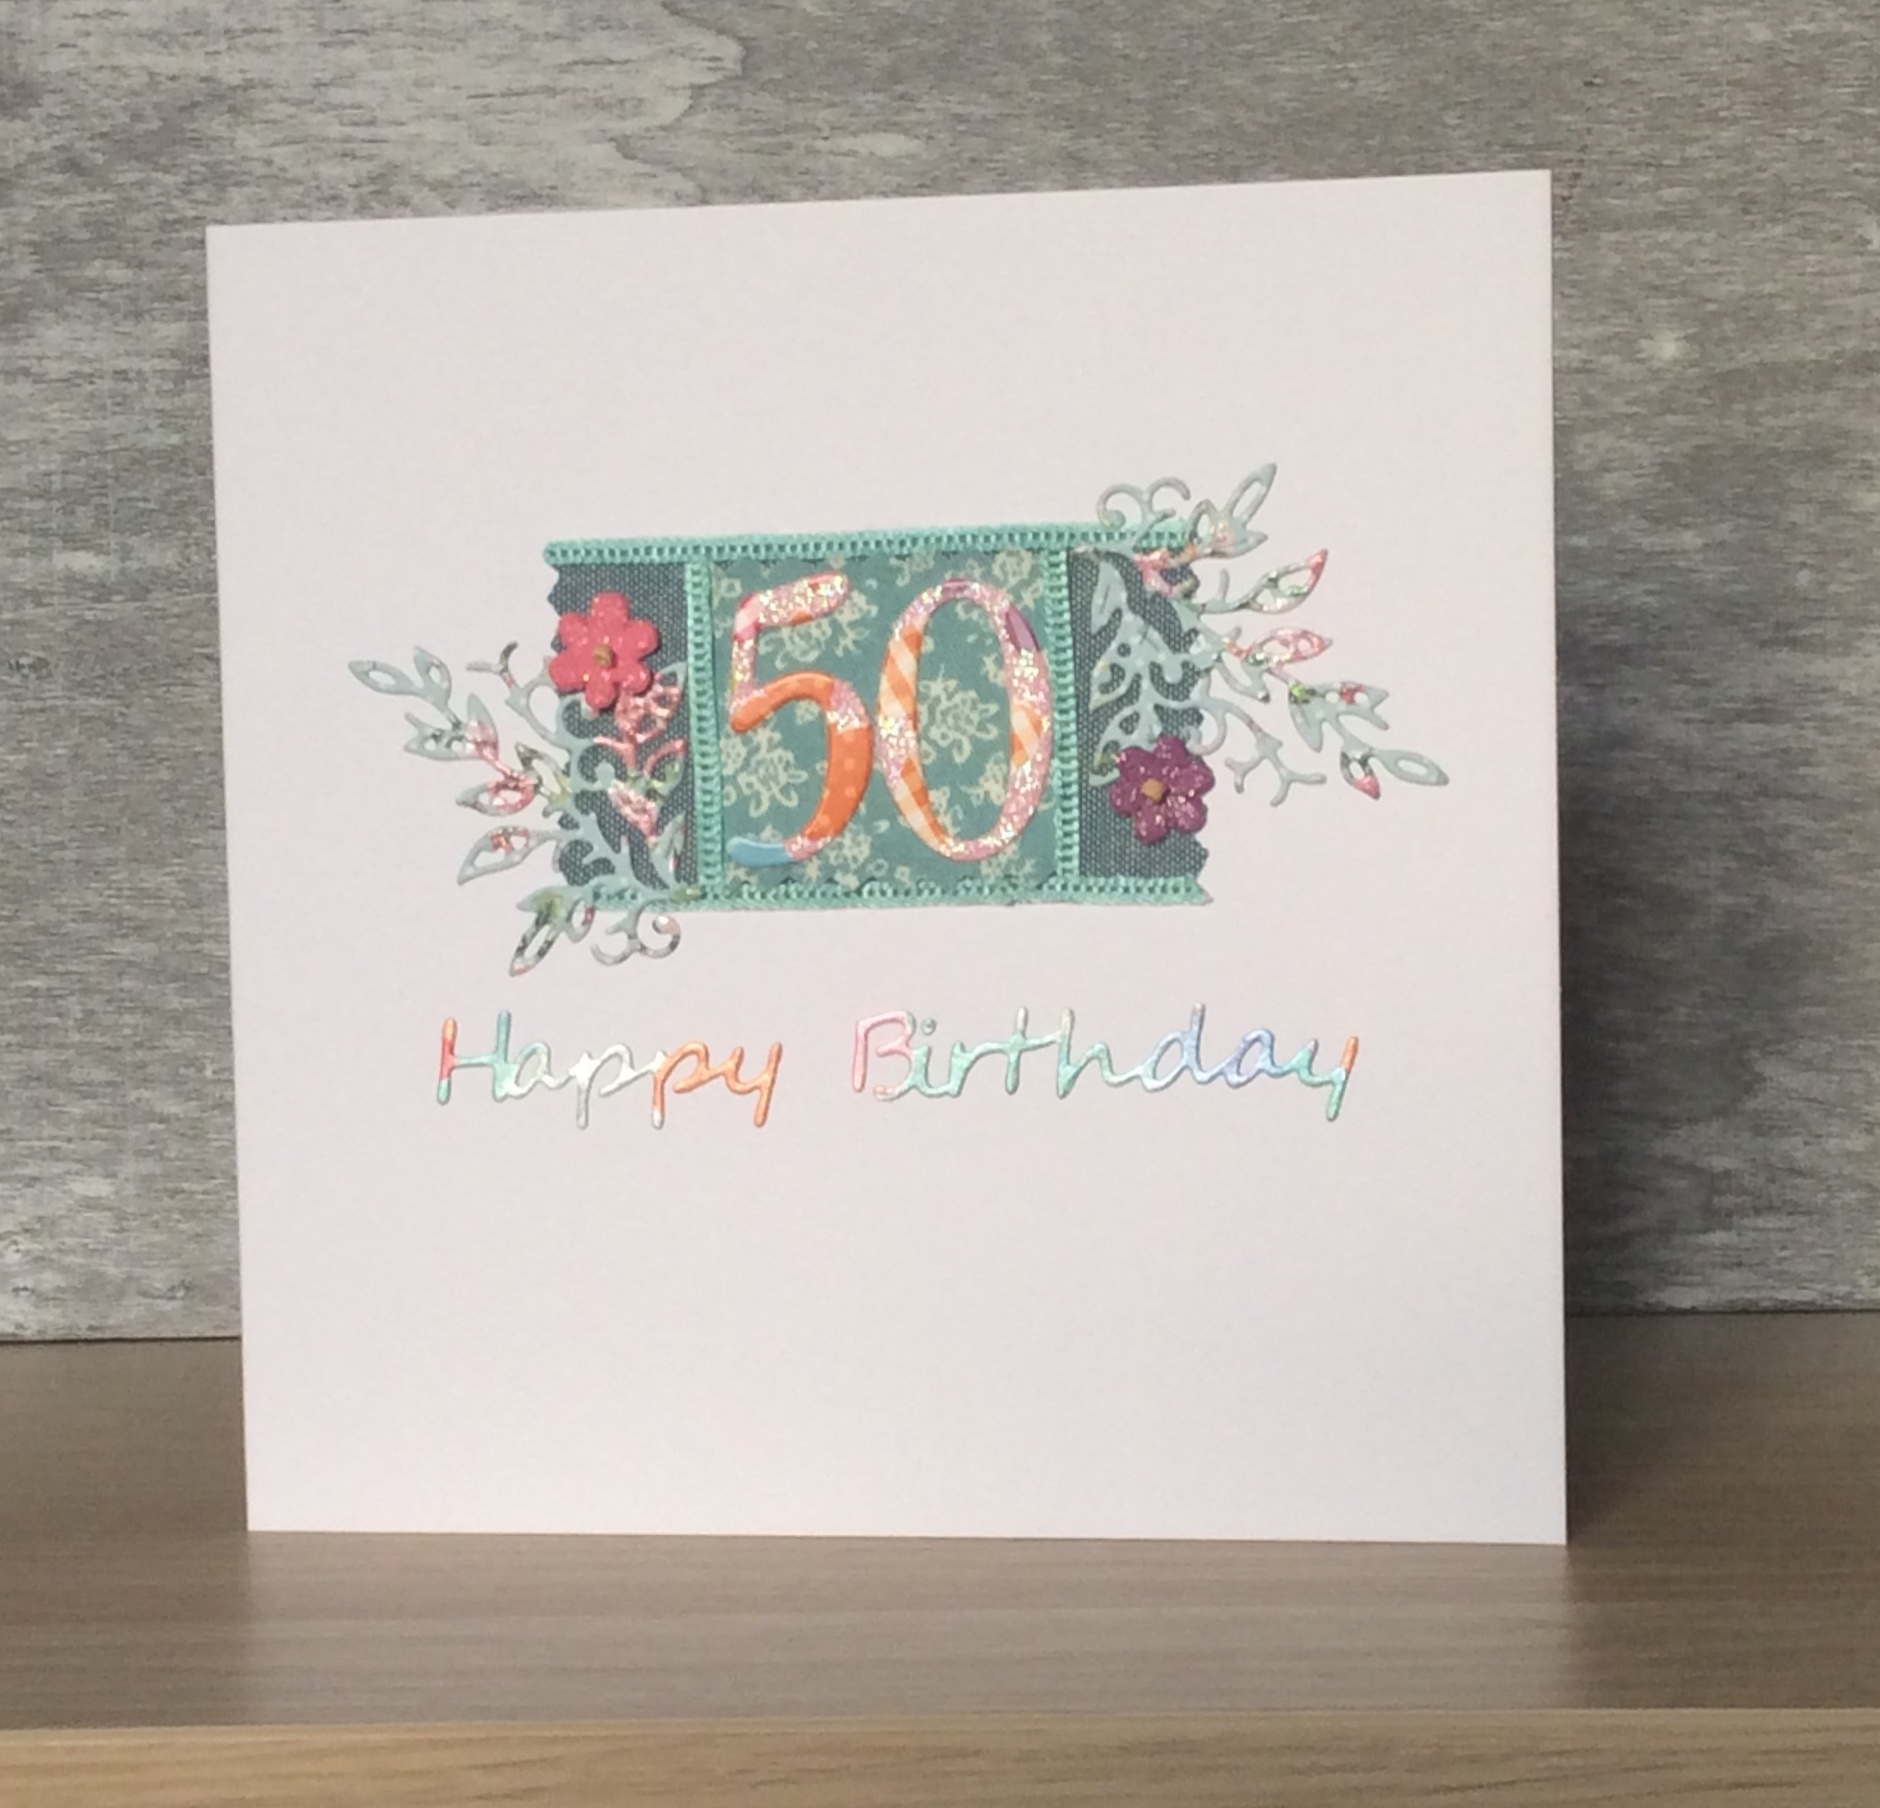 Handmade 60Th Birthday Card Ideas Handmade Greeting Cards Pretty Birthday Cards Using Teal Coloured Ribbons 50th 60th And 70th